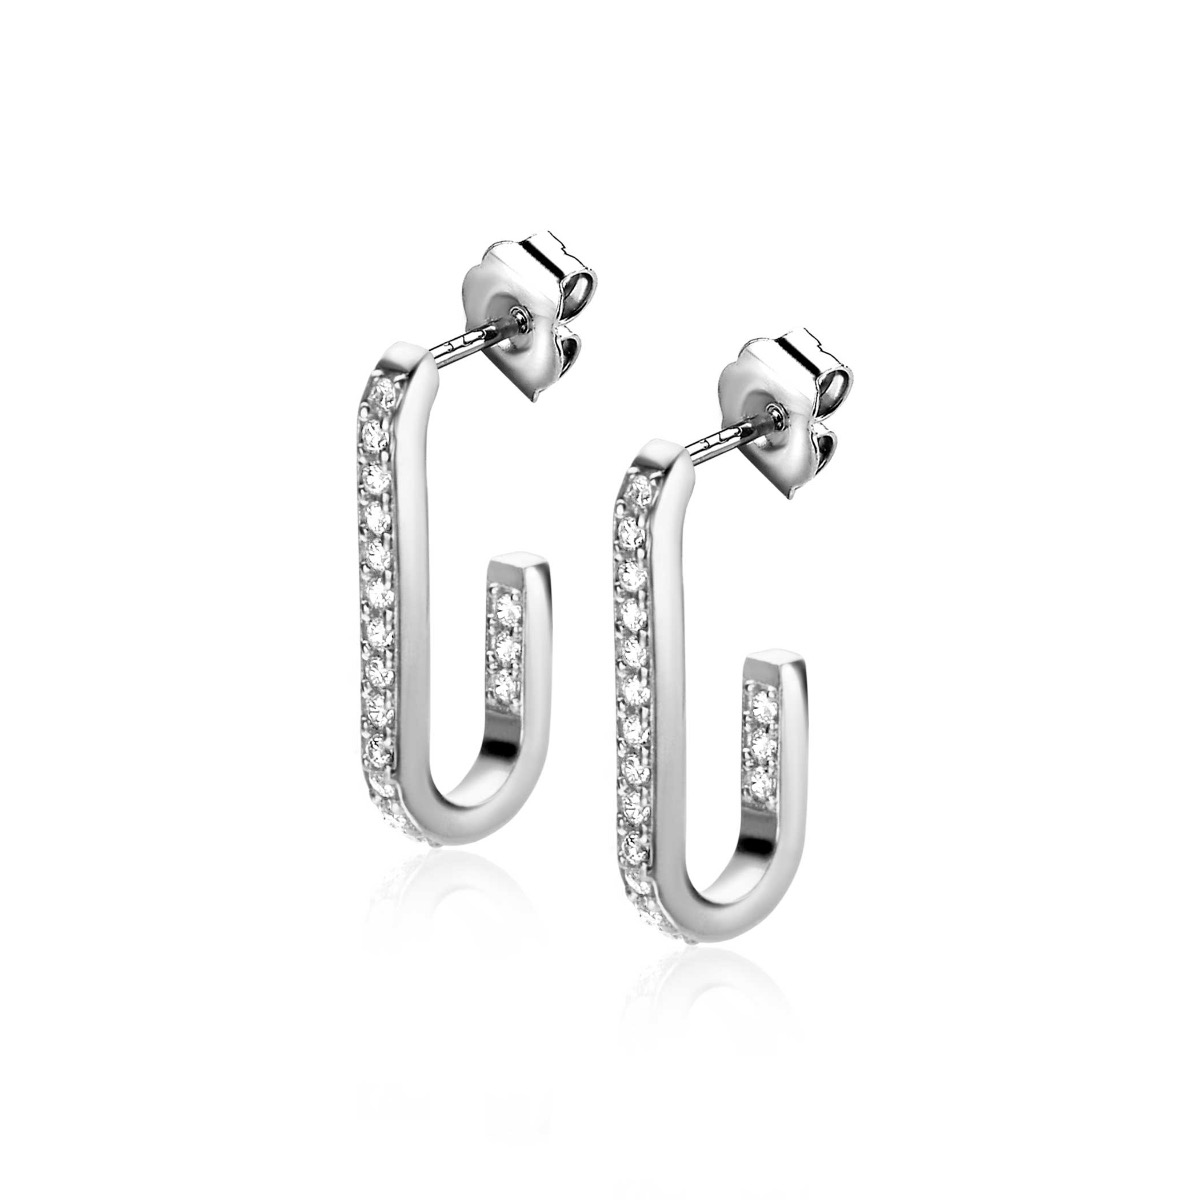 20mm ZINZI Sterling Silver Earrings with Oval Shape Set with White Zirconias ZIO2310